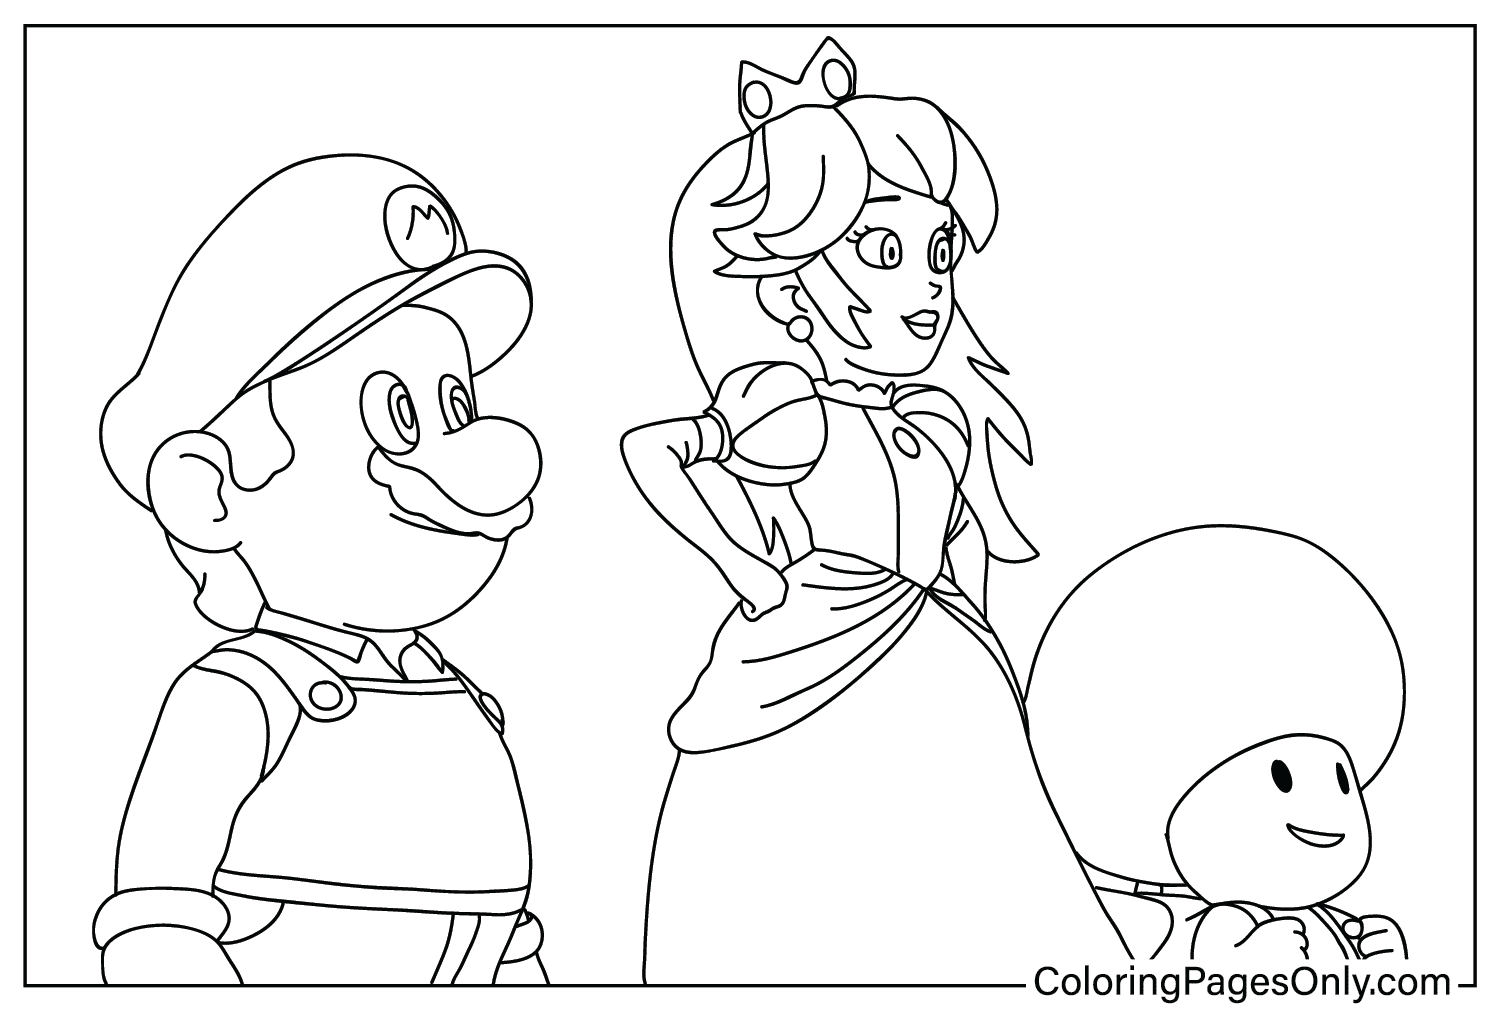 Mario, Princess And Toad Coloring Page - Free Printable Coloring Pages